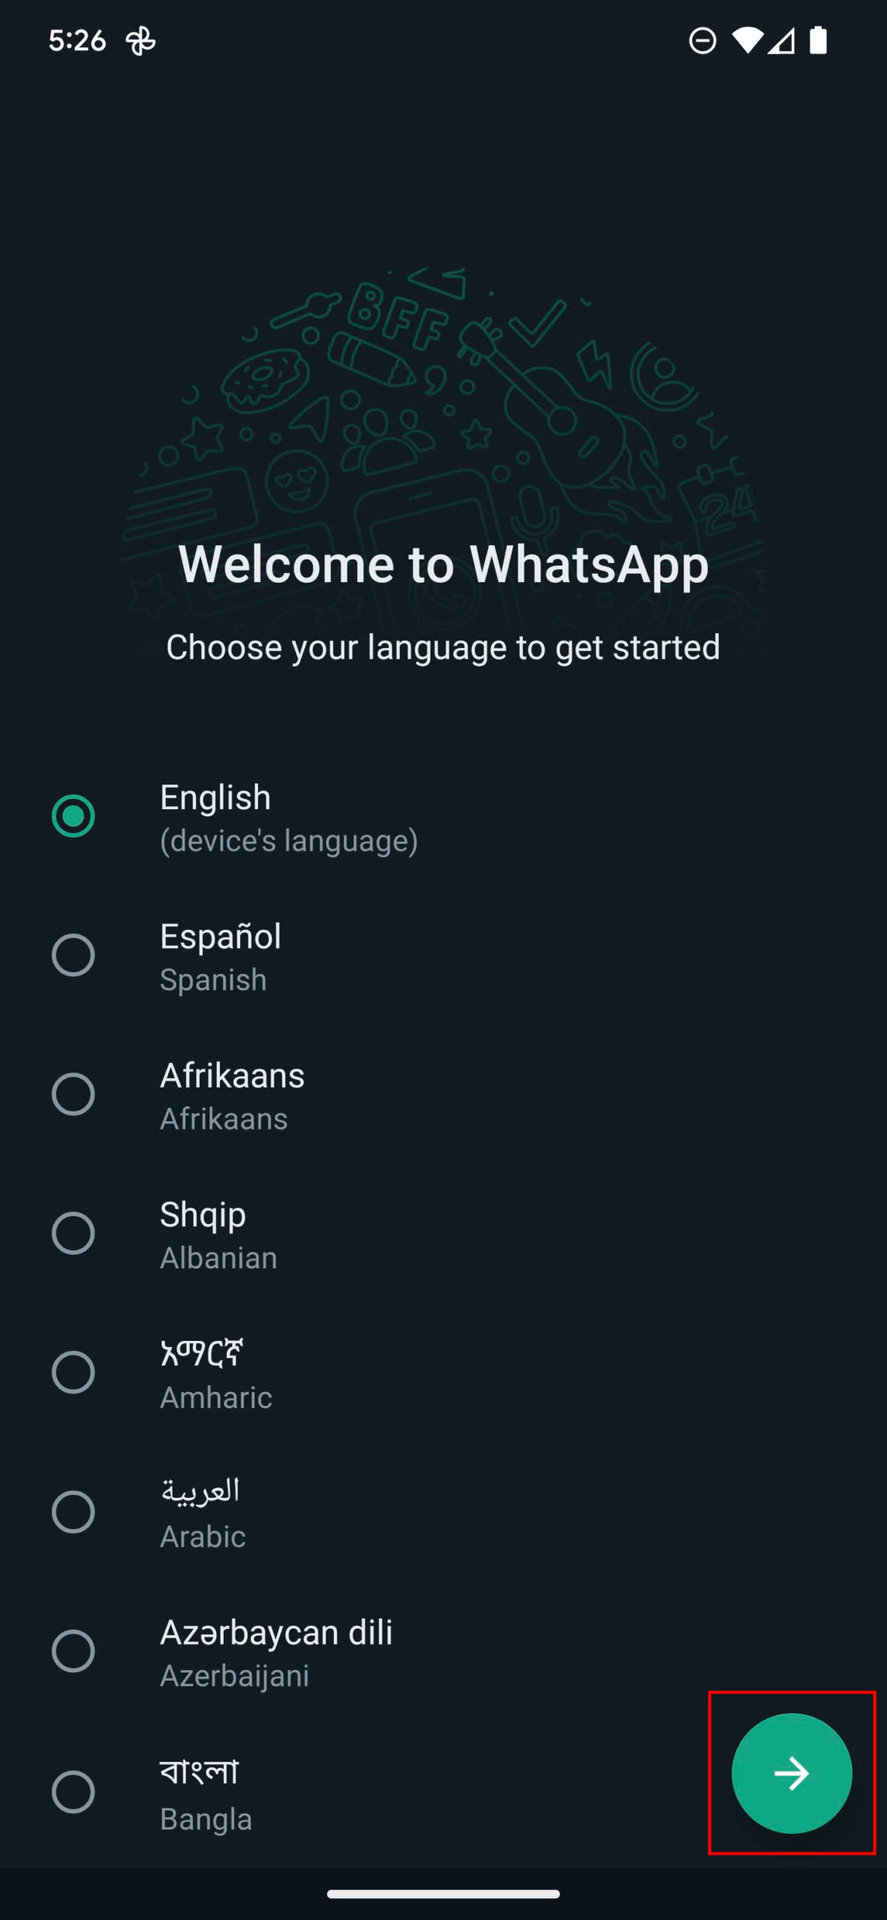 How to use WhatsApp without a SIM using a landline 1